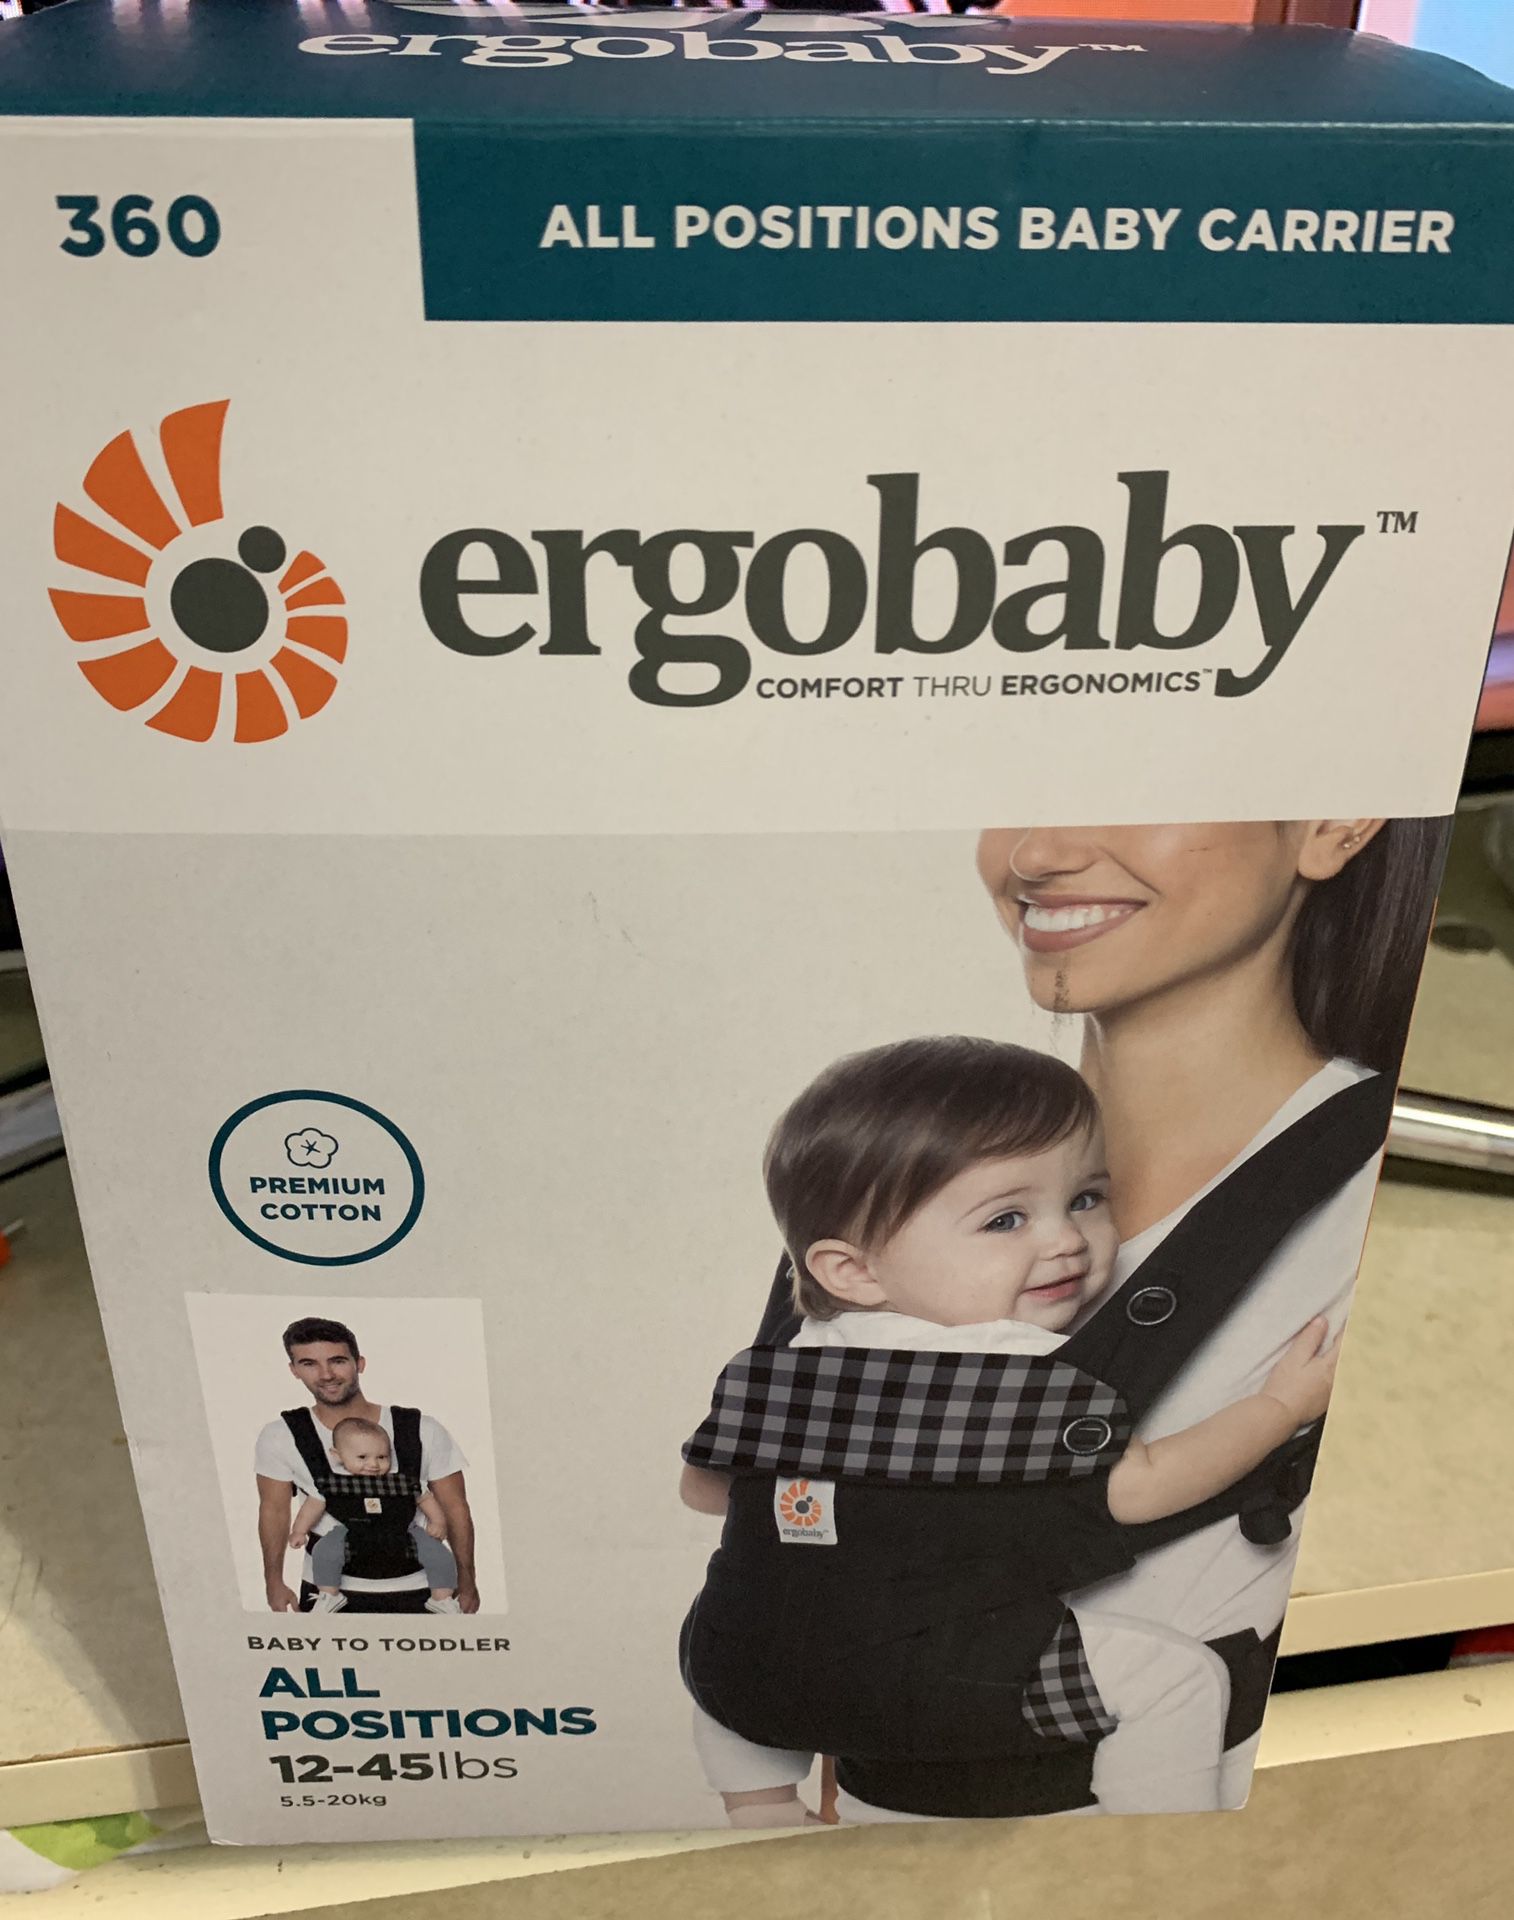 Baby carrier Baby to toddler